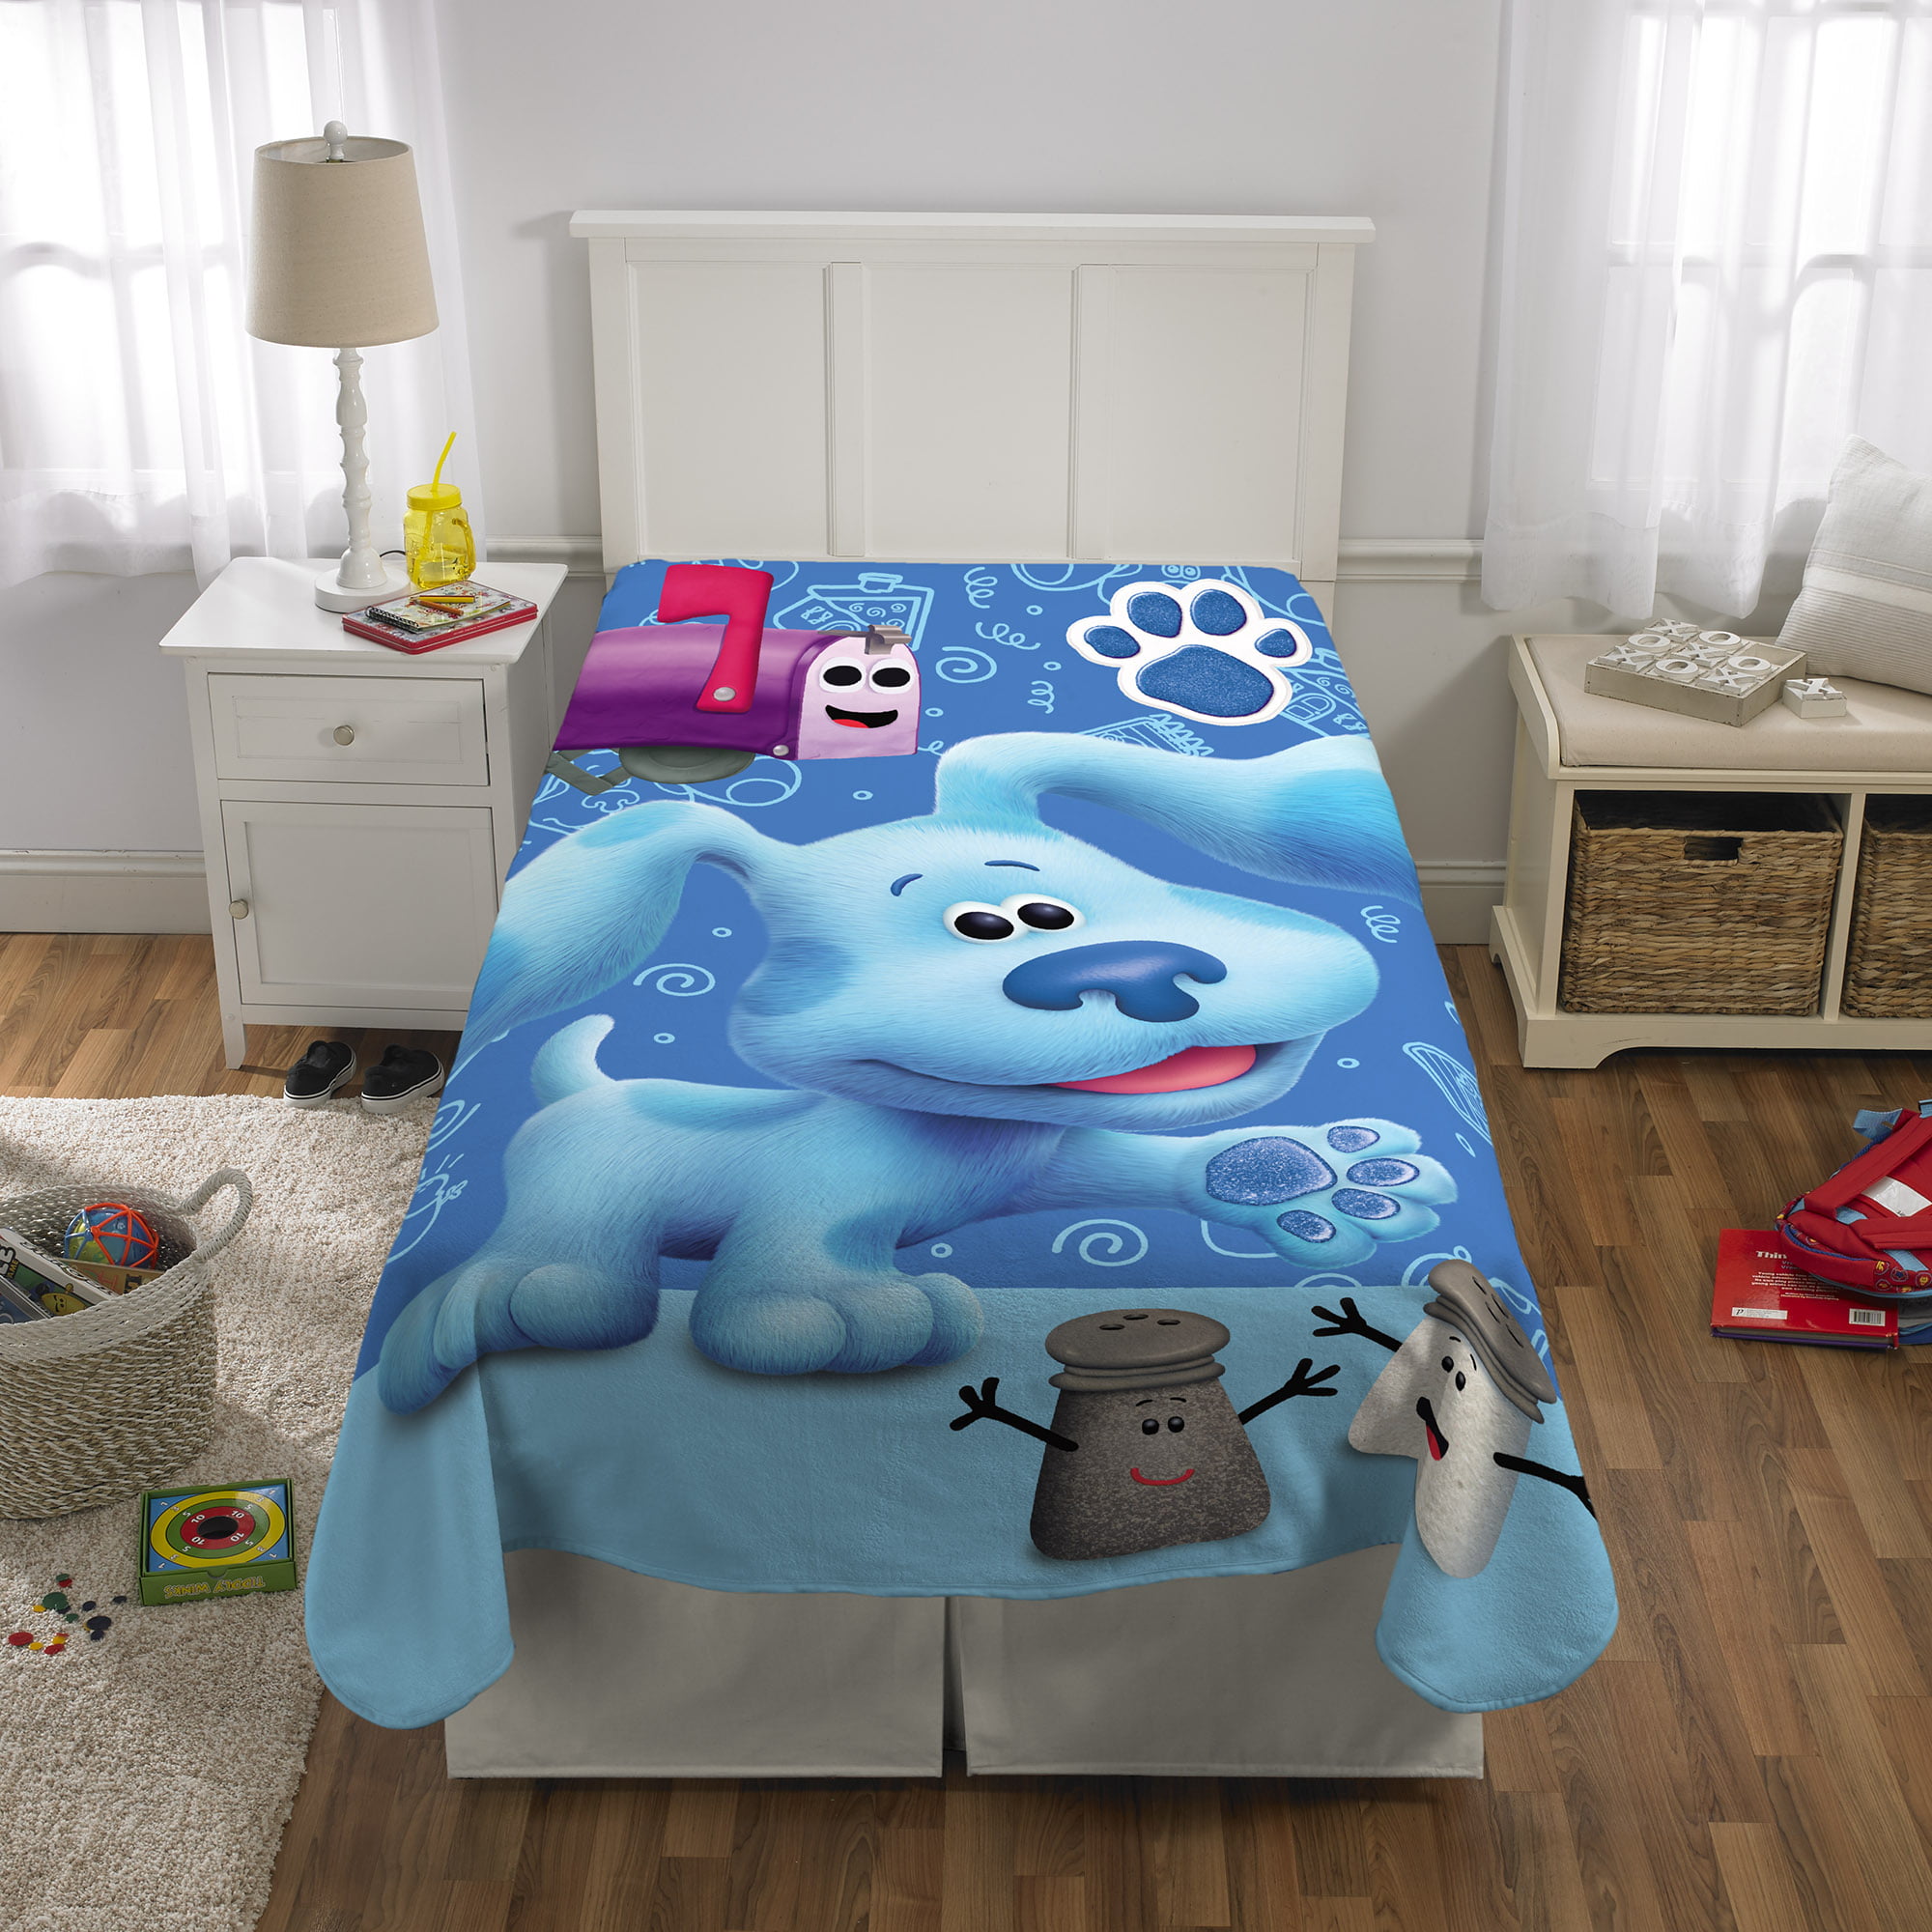 Meet Gentle Childrens Blues Clues Dog Flannel Fleece Throw Blanket Lightweight Cozy Plush Microfiber Bedspreads Novelty Bedding Sofa Soft Air Conditioning Quilt Multicolor5, S 50x40 